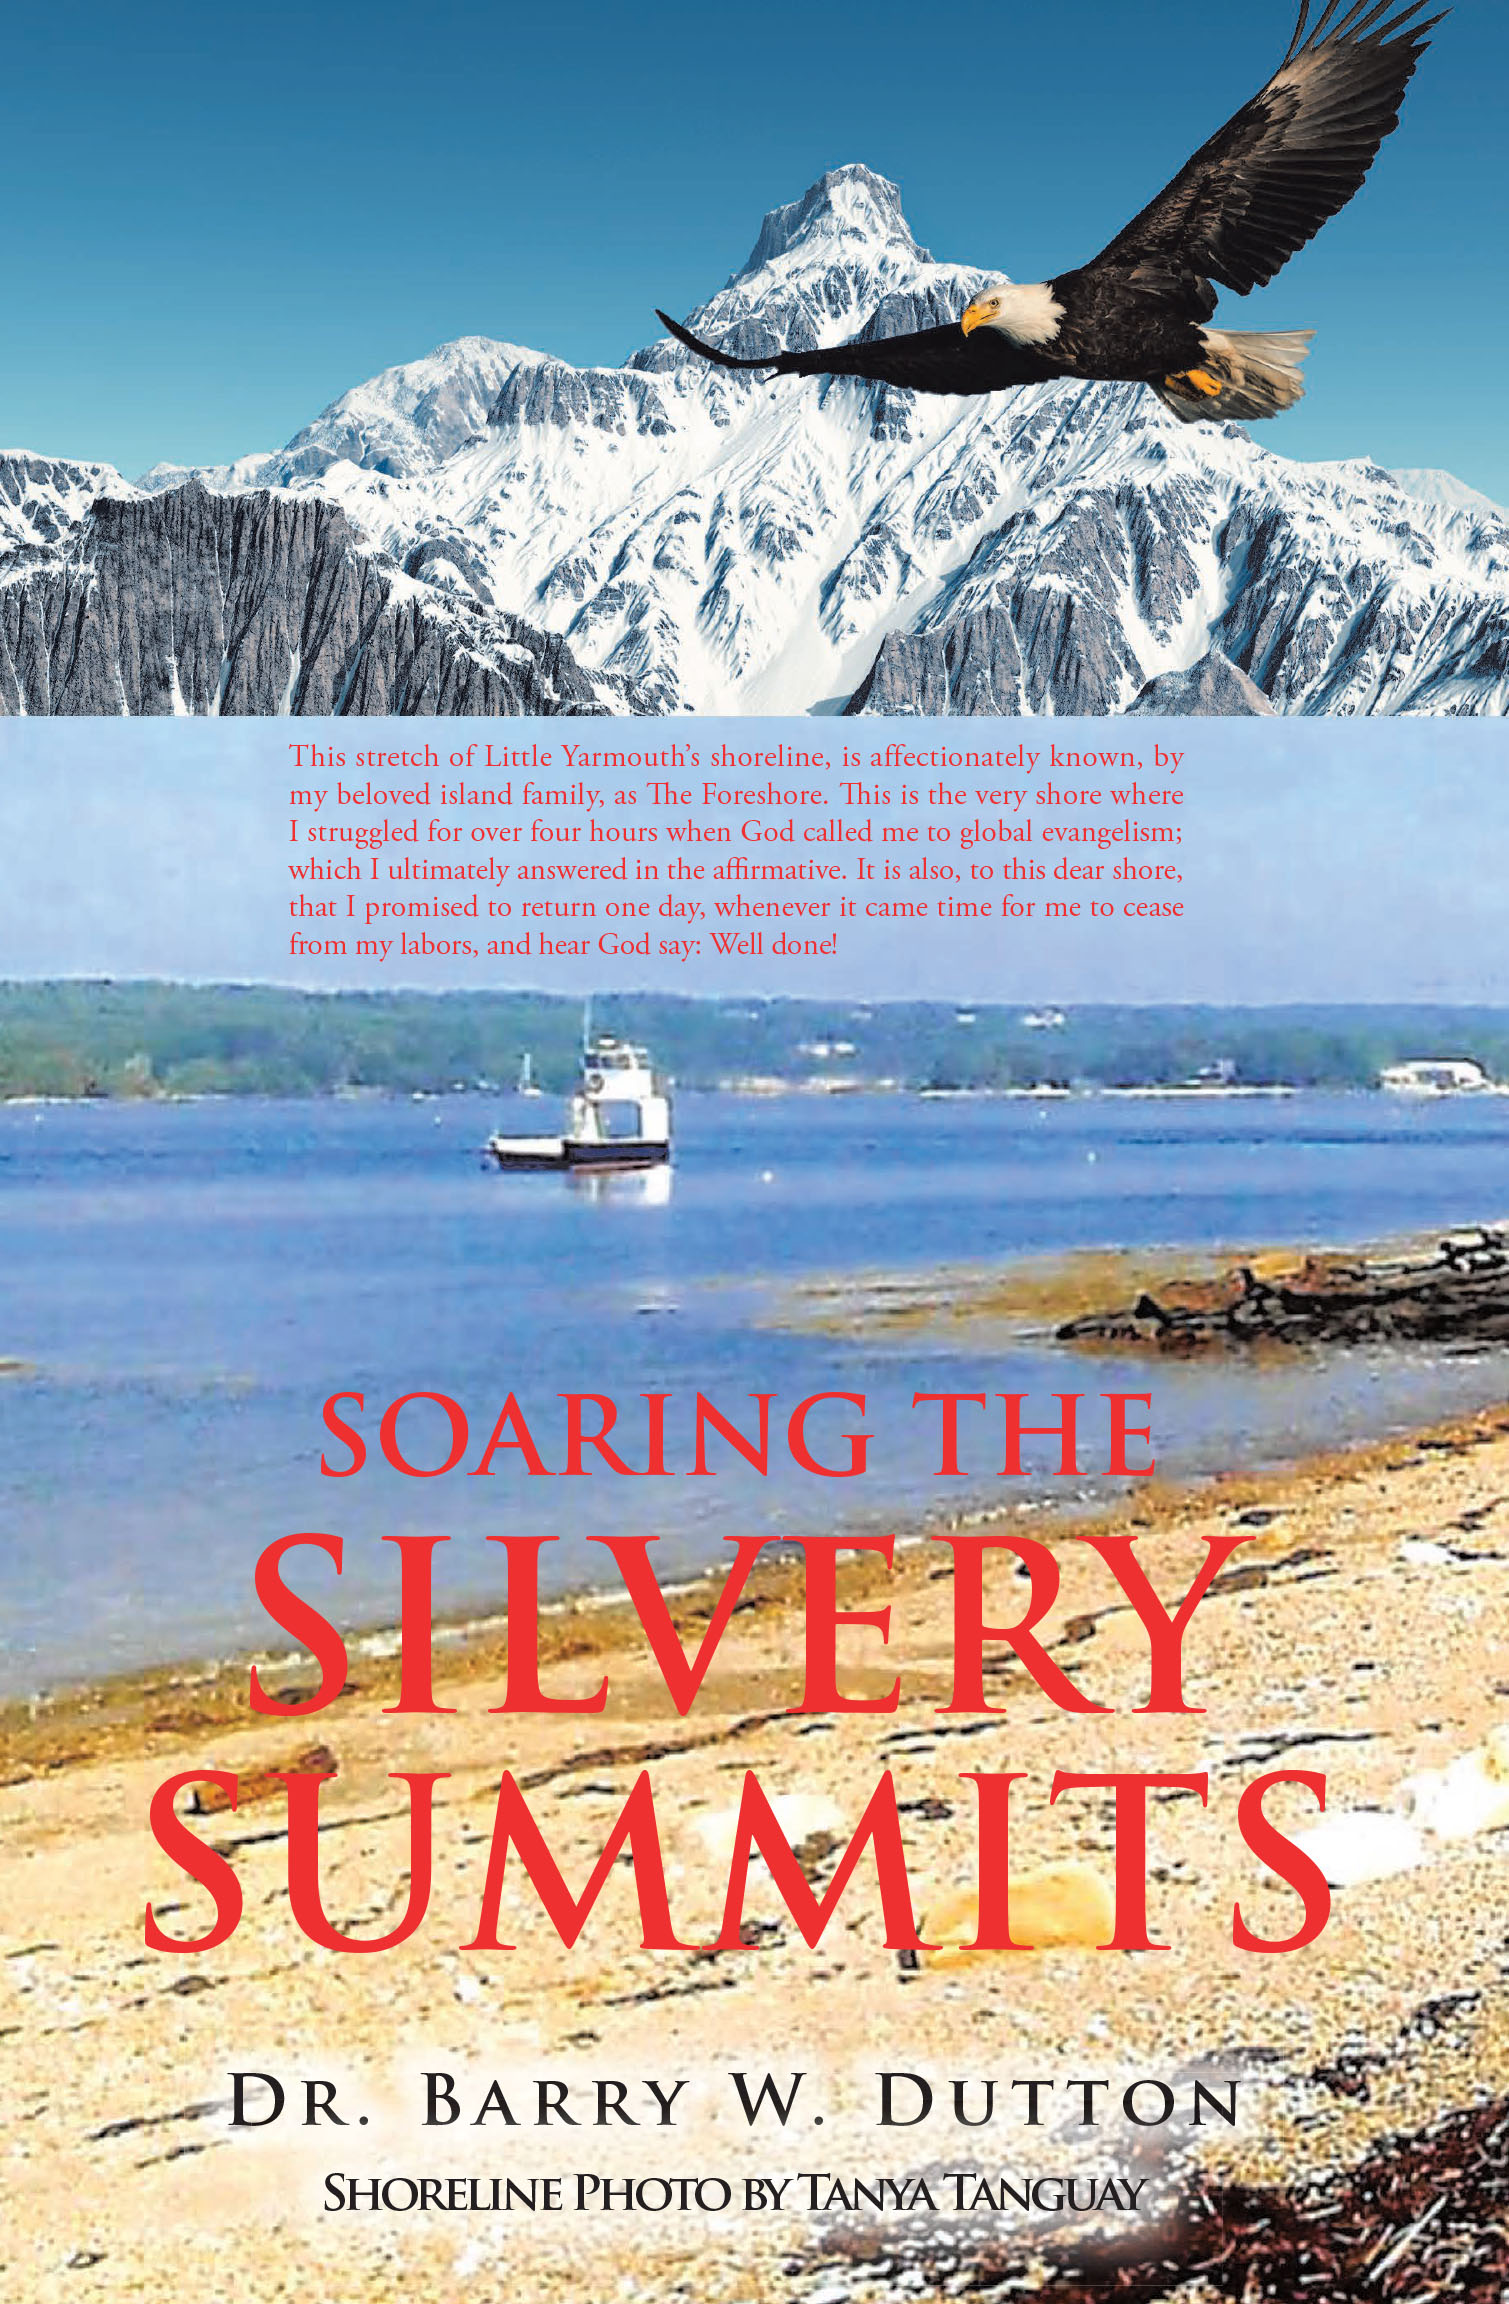 Dr. Barry W. Dutton’s Newly Released "Soaring the Silvery Summits" is an Inspiring Story of Personal and Spiritual Fortitude in God’s Plan